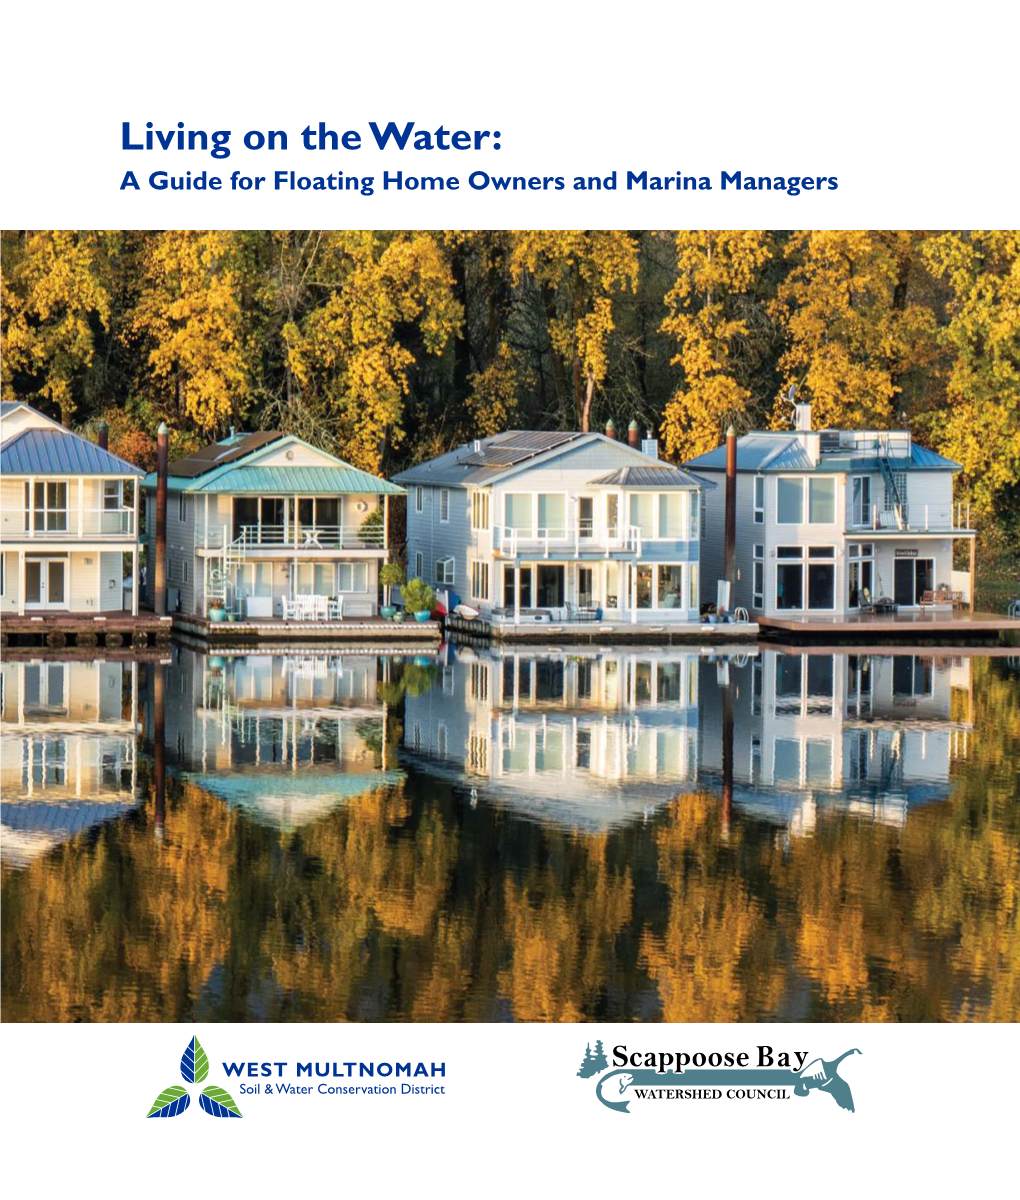 Living on the Water: a Guide for Floating Home Owners and Marina Managers Credits